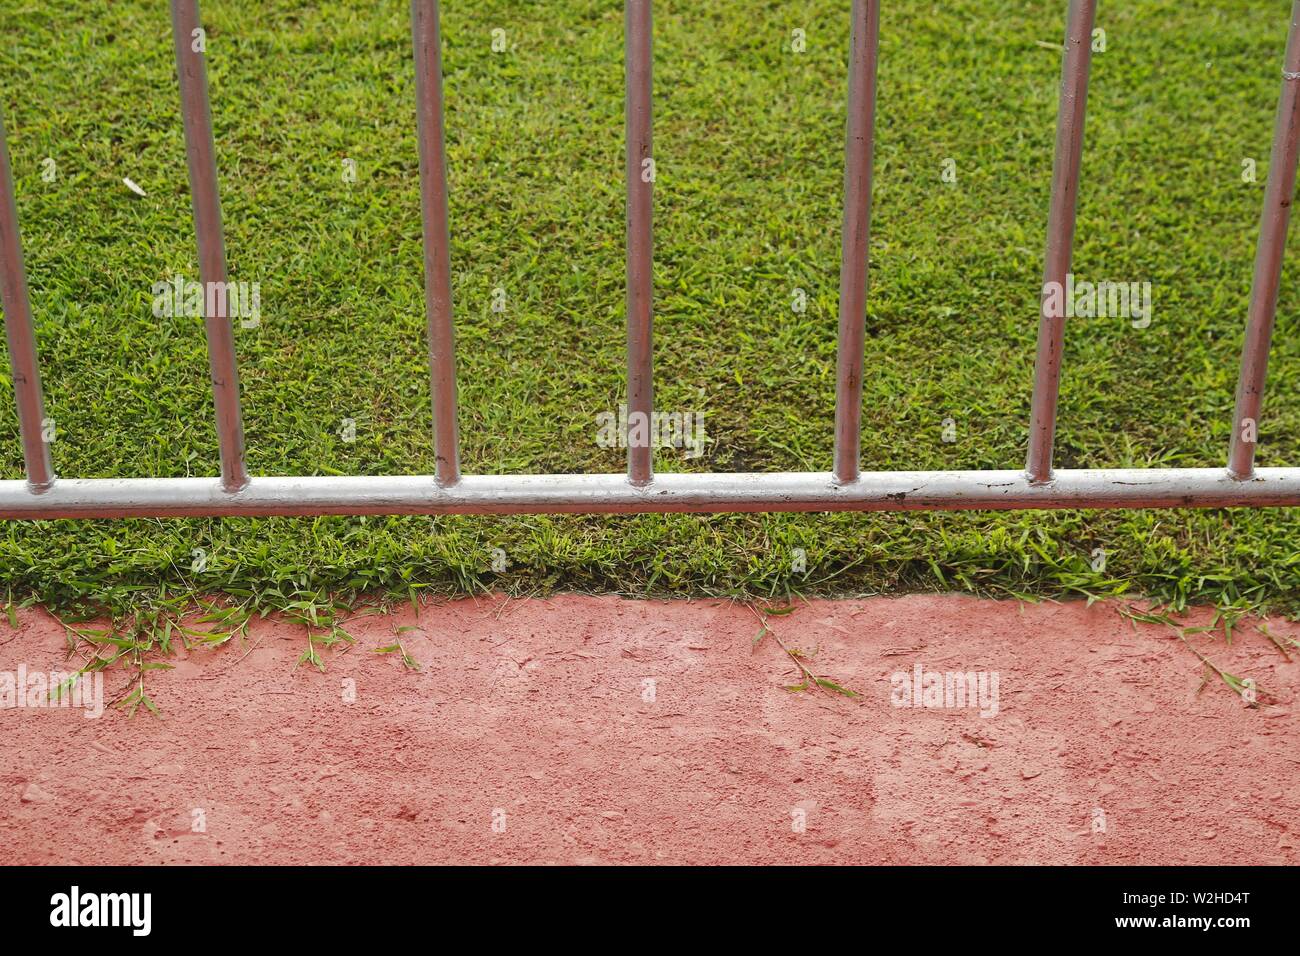 Photo of a steel fence or barricade and a green grass field Stock Photo